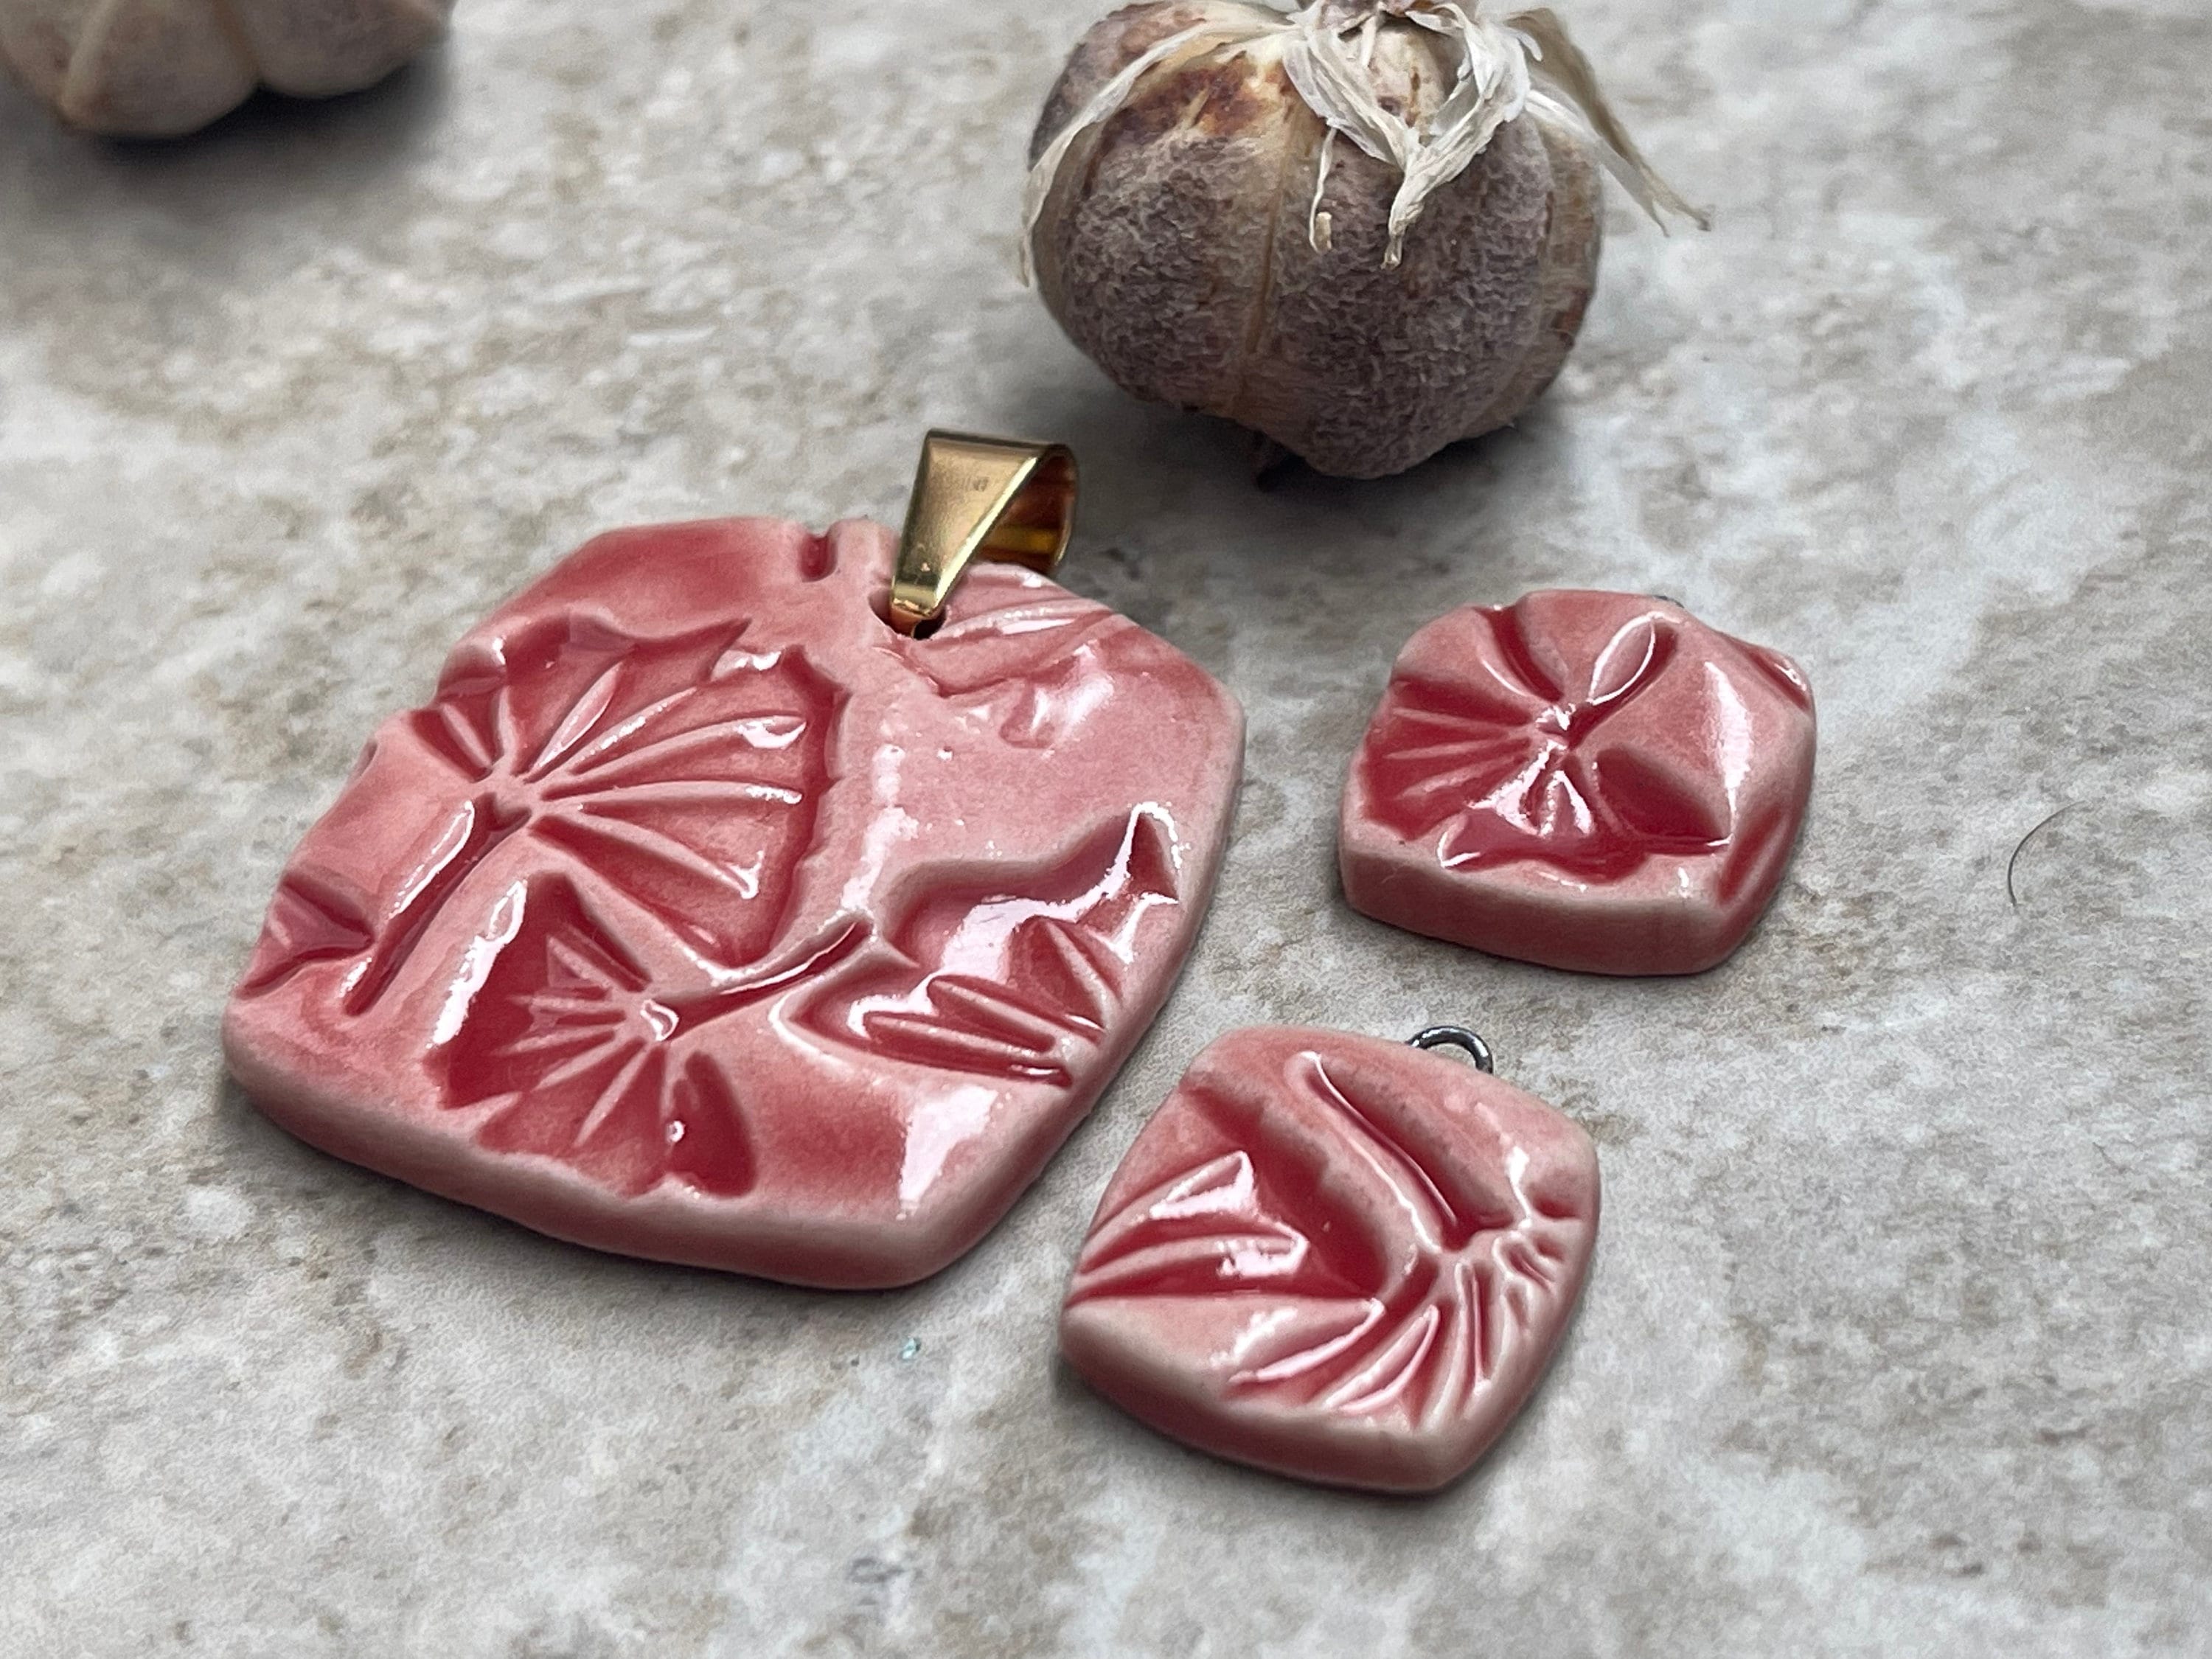 Red Ginkgo Bead, Ginkgo Pendant, Plant Lover, Bead Set, Ginkgo Jewelry, Porcelain Ceramic Pendant, Jewelry Making Components